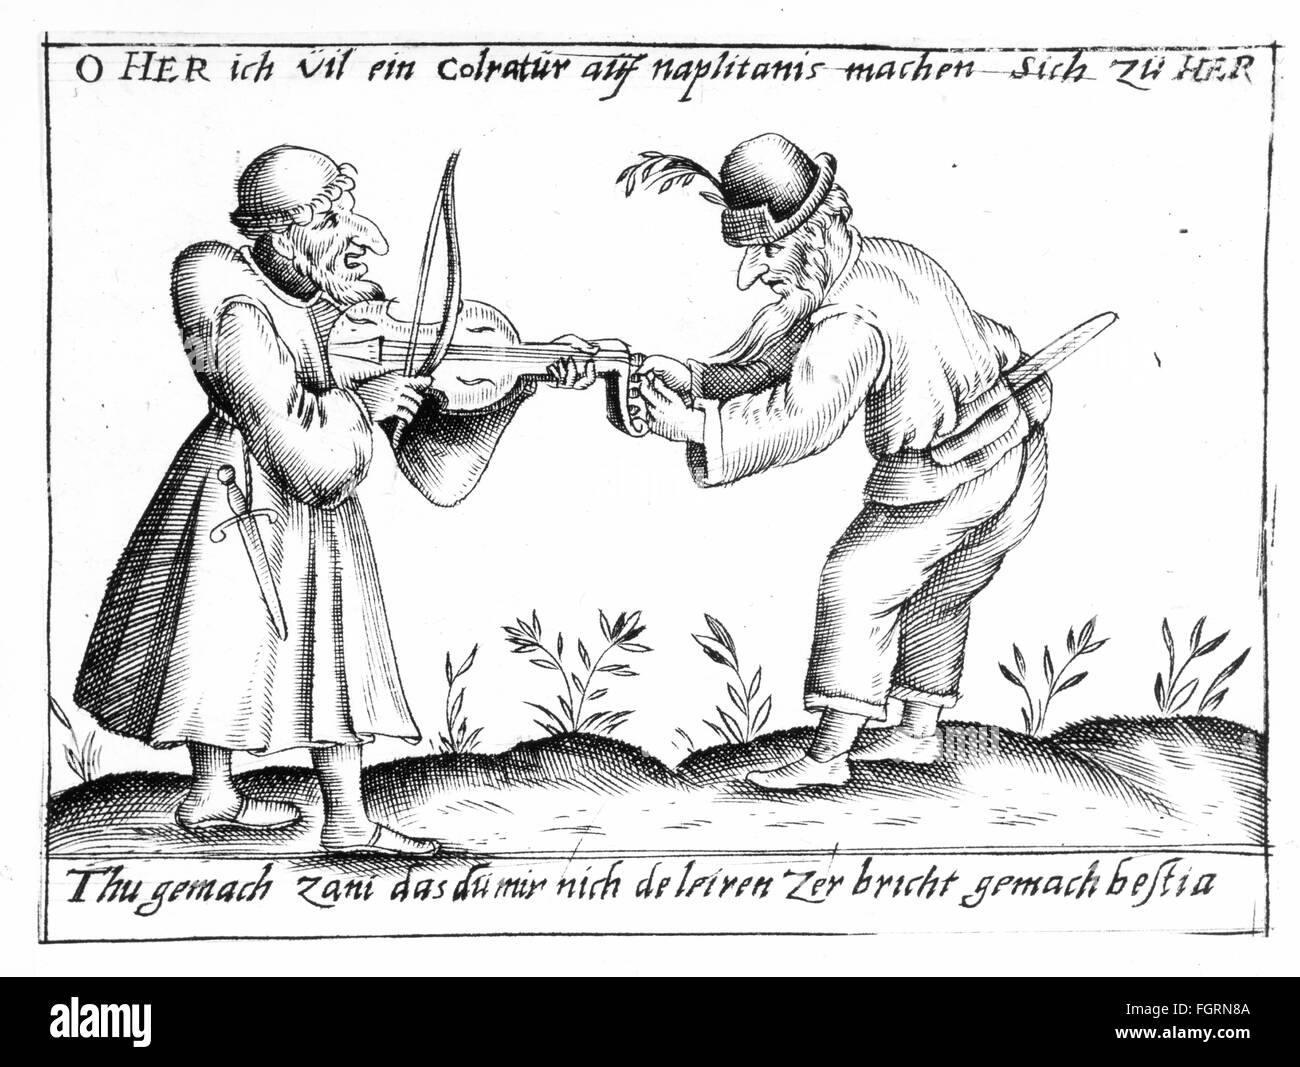 music,caricature,musician,rebec playing monk let have his instrument adjusted,series of farces of Italian comedians,copper engraving by Cornelius Met,mid 16th century,Theatermuseum,Munich,jesters,jester,Italy,chordophone,musical instrument,musical instruments,stringed instrument,stringed instruments,string instruments,bowed instrument,string instrument,bowed instruments,the strings,satire,people,men,man,male,caricature,caricatures,playing,play,monk,monks,adjust,adjusting,farce,farces,comic,comedian,comics,comedians,histo,Additional-Rights-Clearences-Not Available Stock Photo